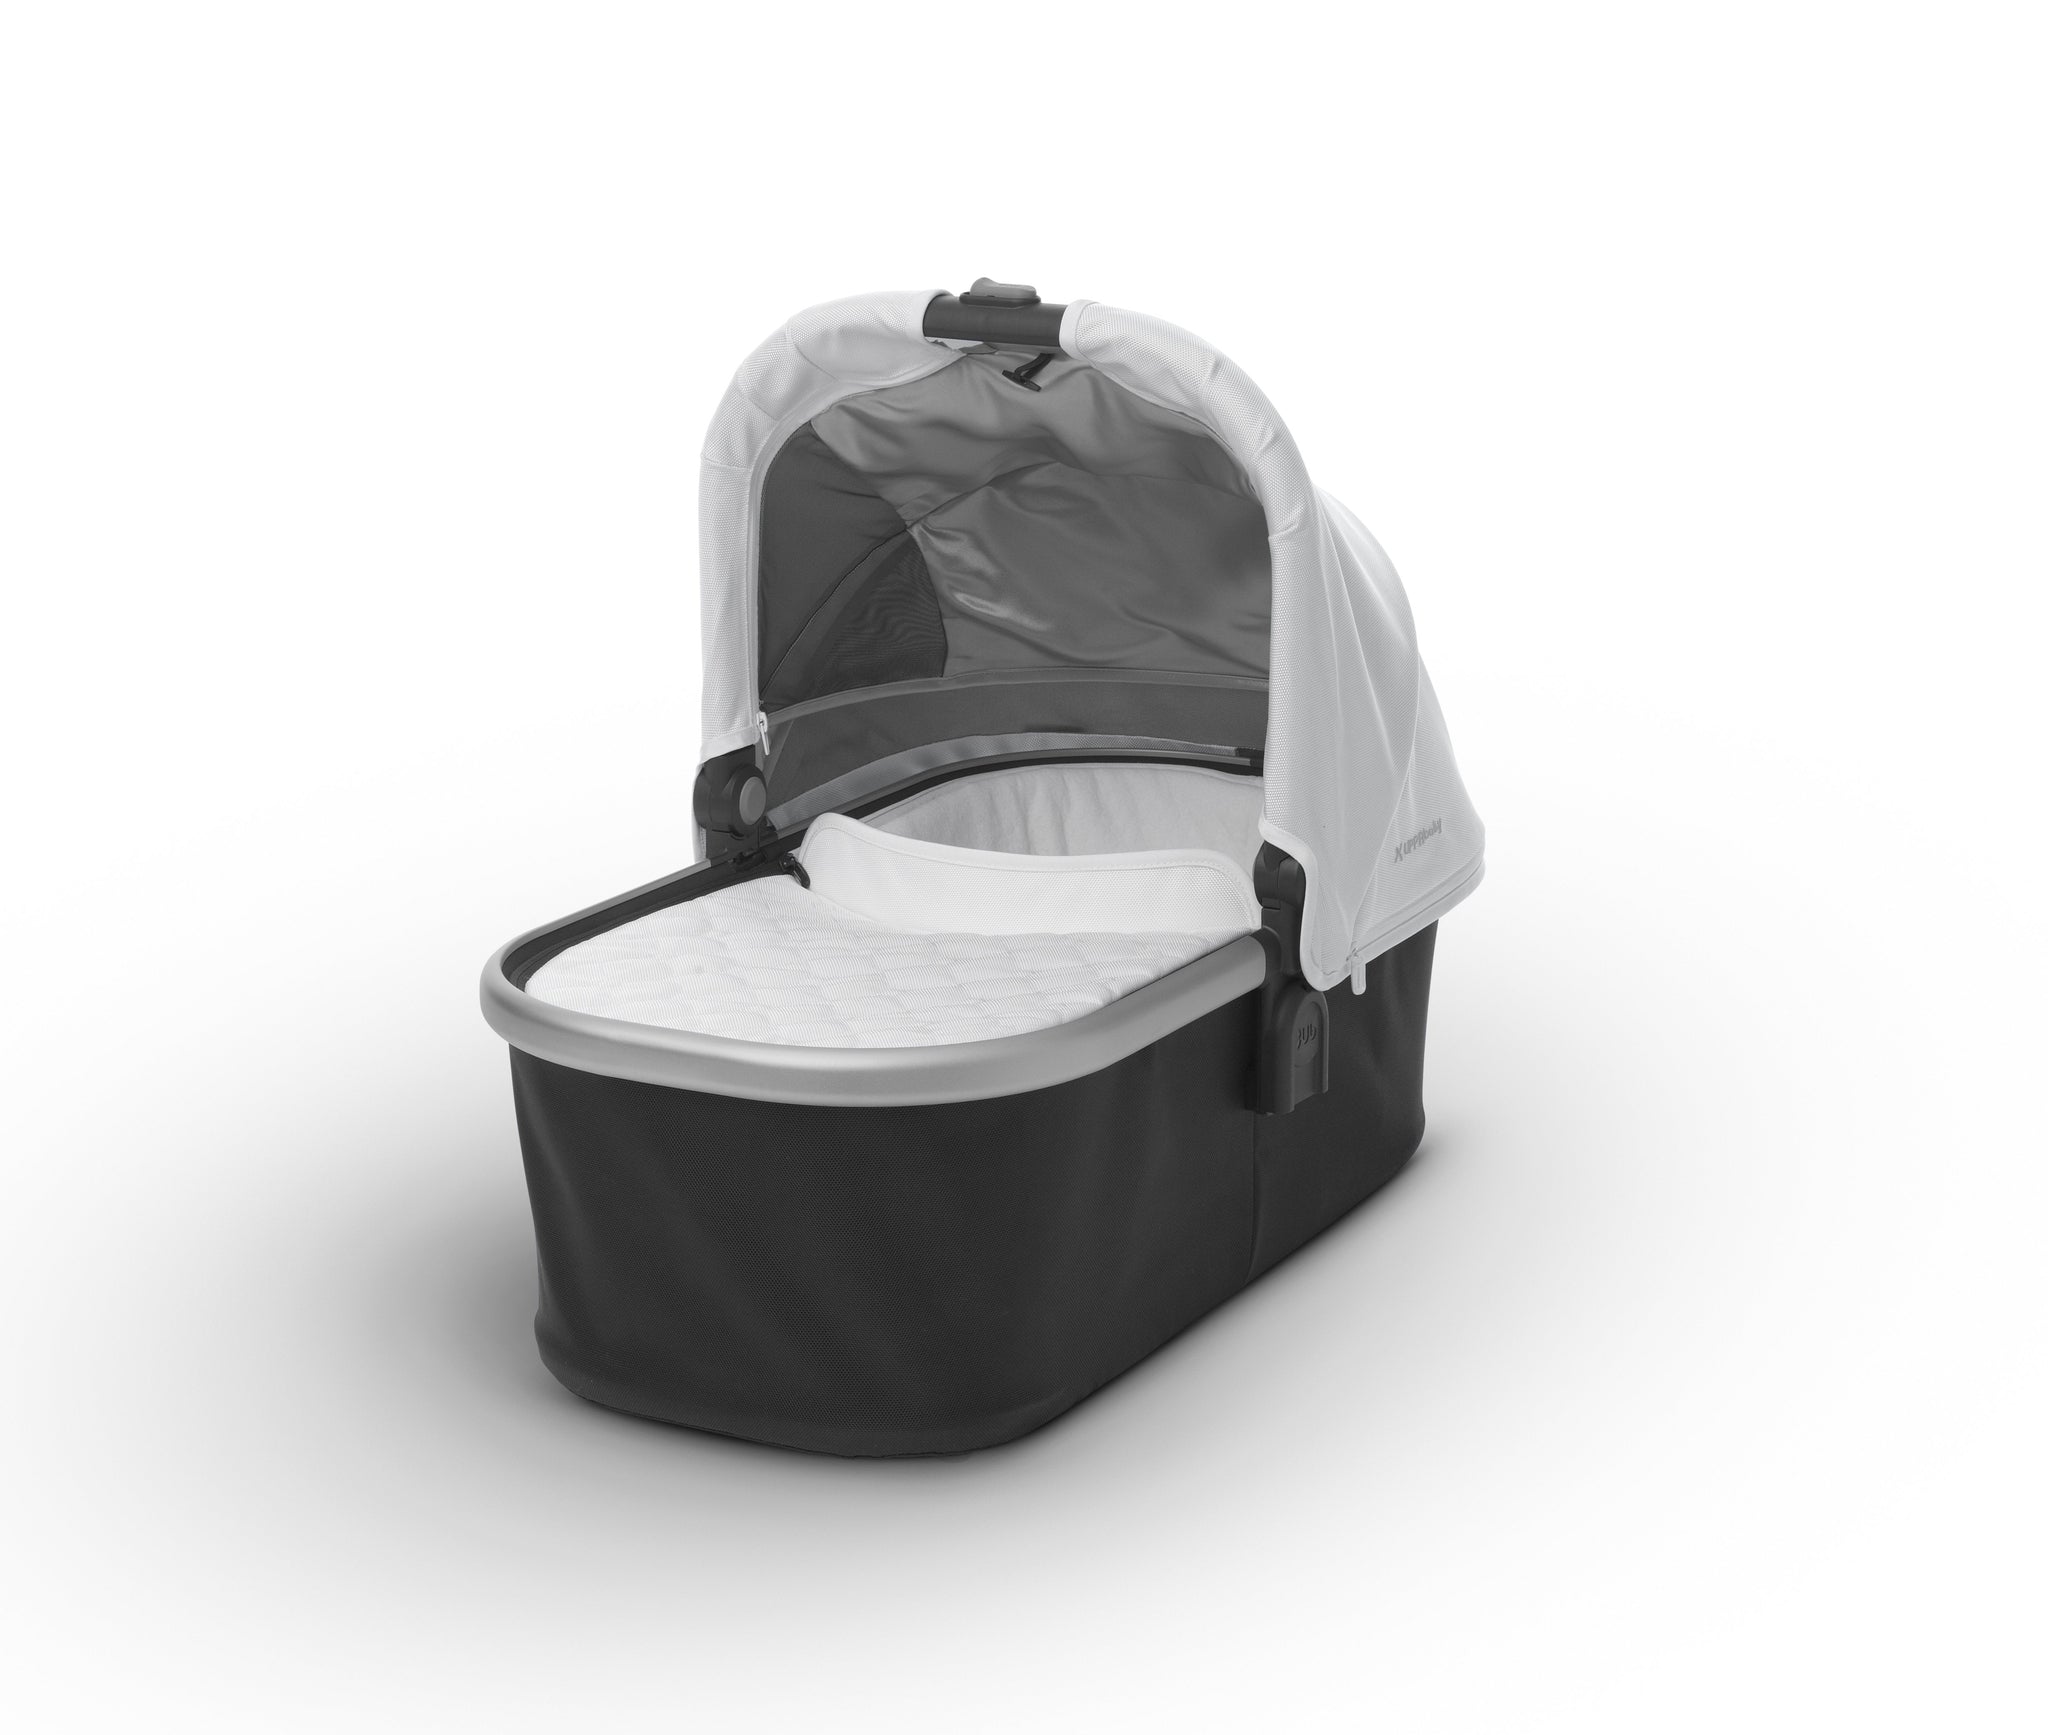 Inglesina Electa Bassinet + Stand for Baby and Newborns up to 6 Months -  for Overnight Sleep & Travel - with Ventilation Control System, Cover 